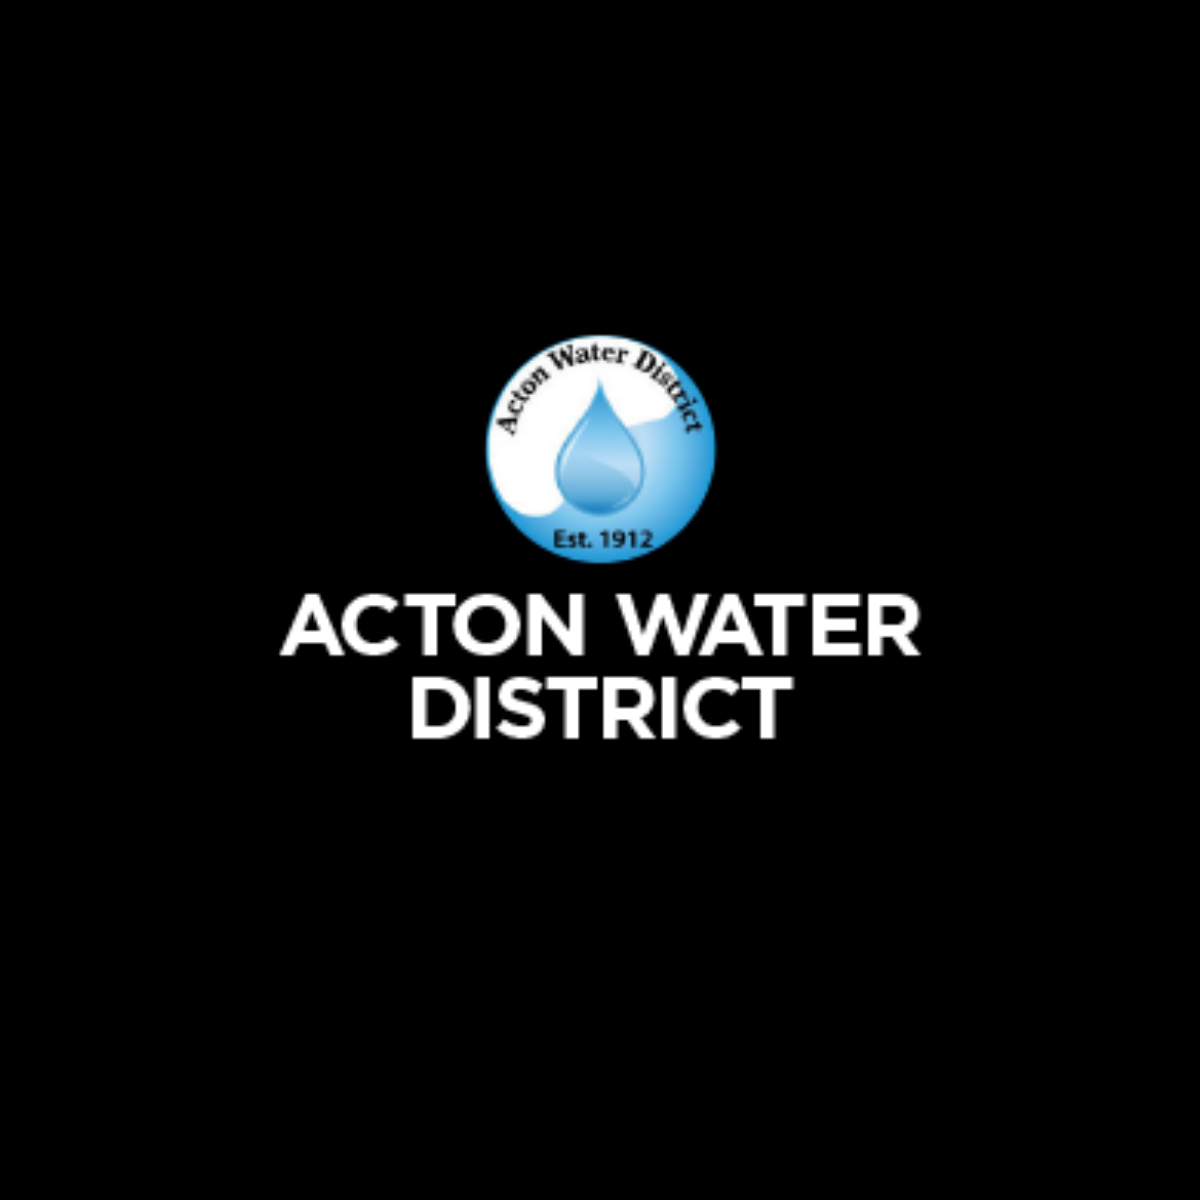 Acton Water District: Engaging Customers with Electronic Billing Presentment